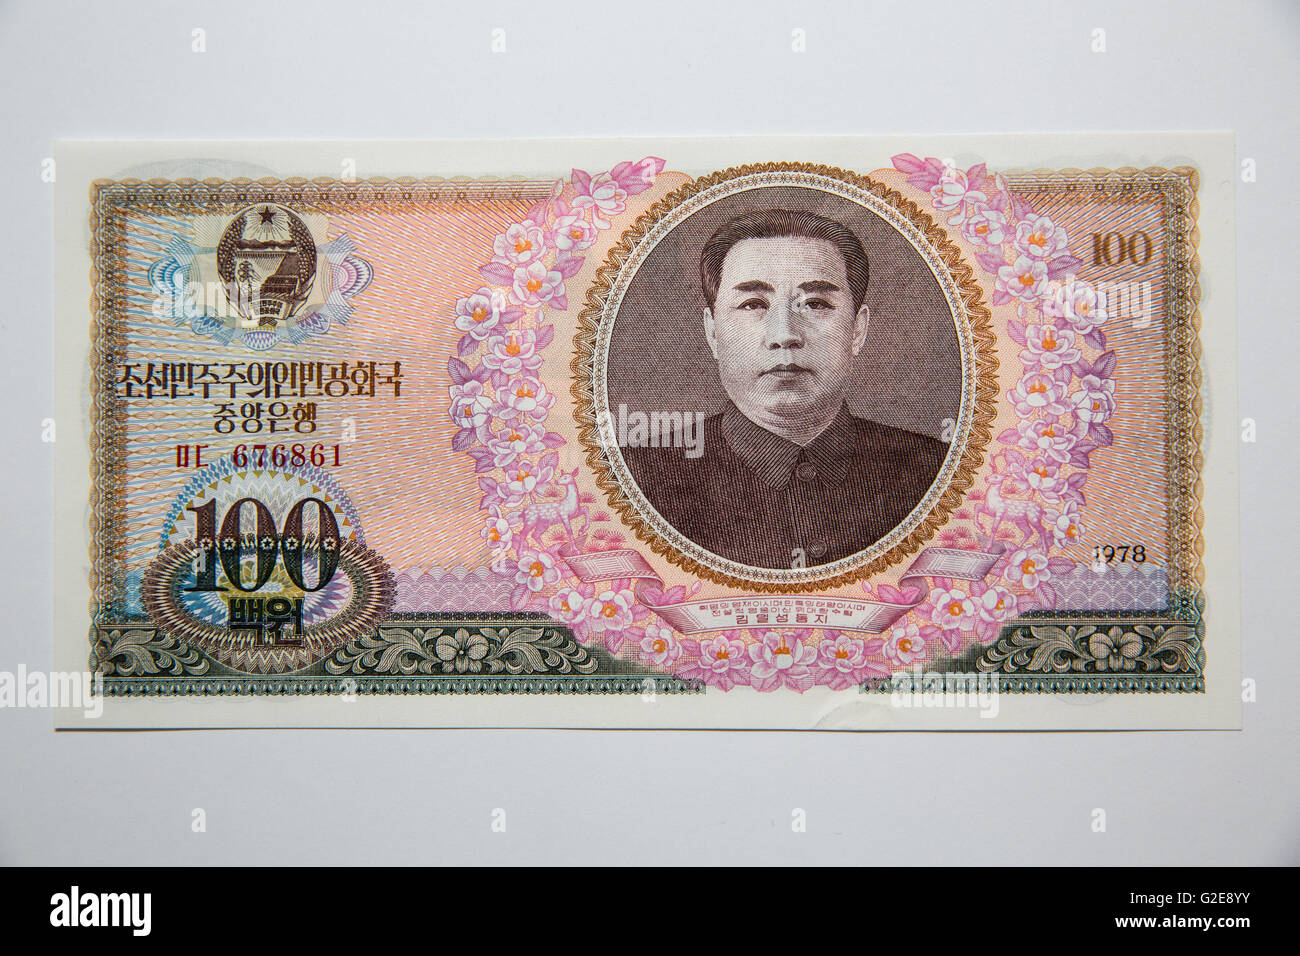 The front of the North Korean 100 note featuring Kim il Sung Stock Photo